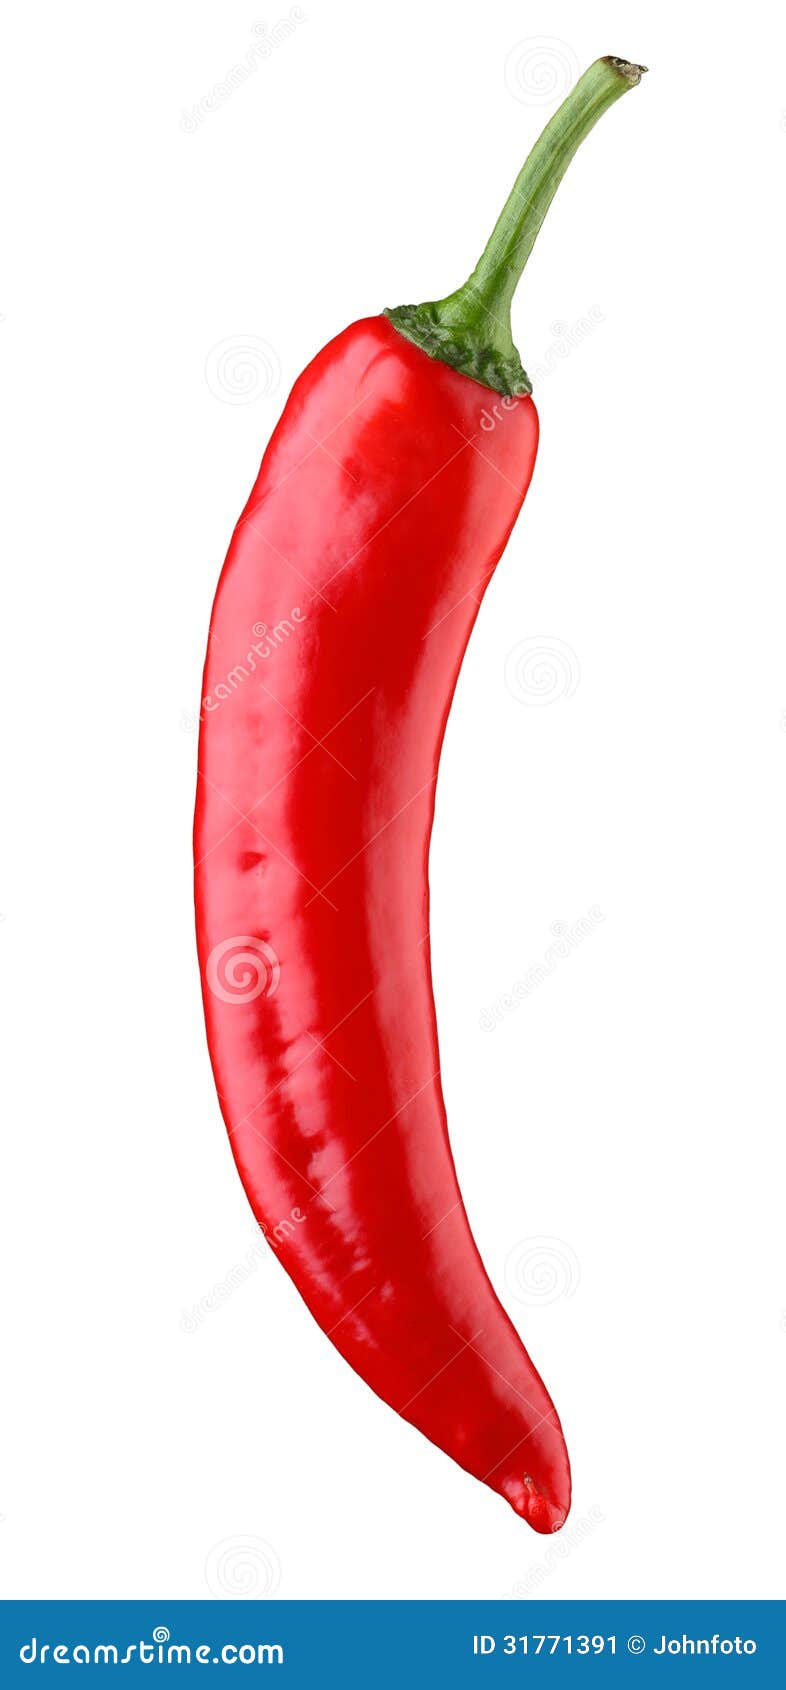 Red hot pepper stock image. Image of vegetable - 31771391